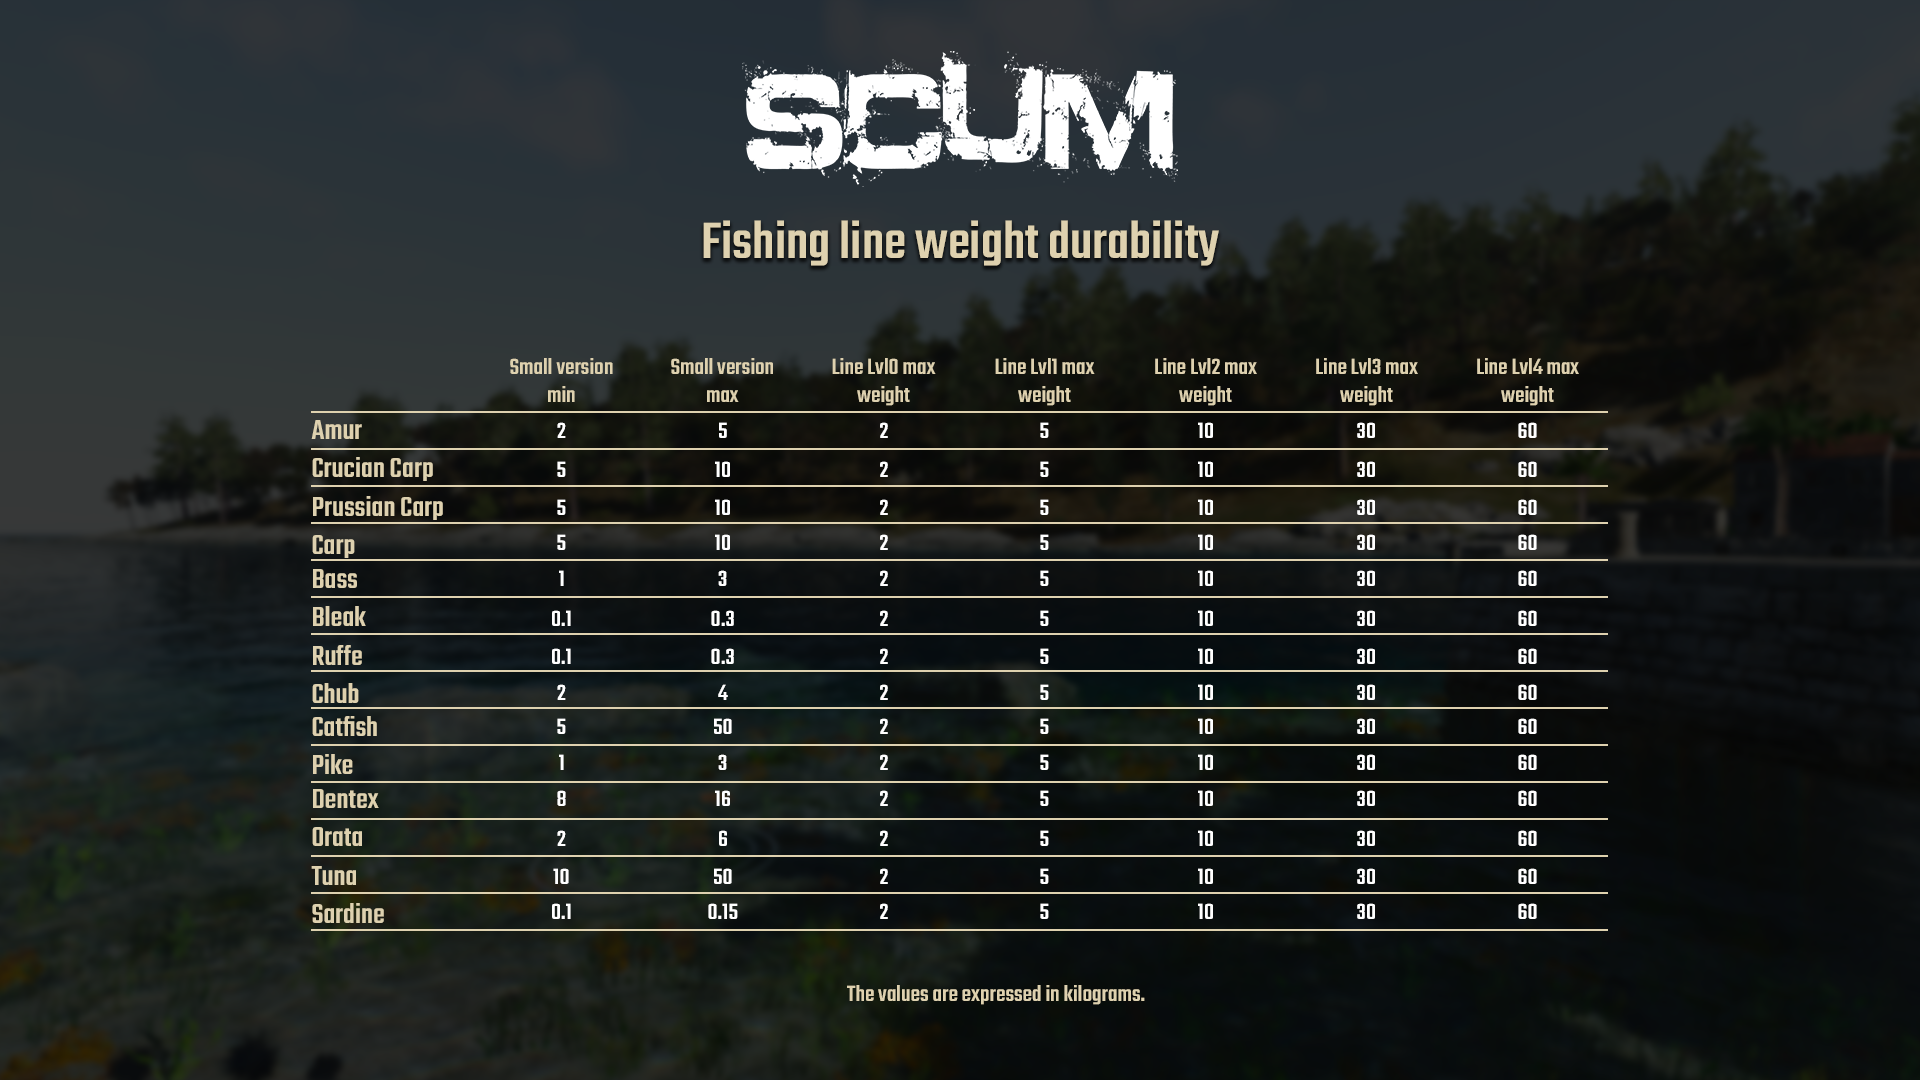 https://static.wikia.nocookie.net/scum_gamepedia_en/images/7/7b/Fishing_fish_line_weight_durability_chart.png/revision/latest?cb=20220705193543